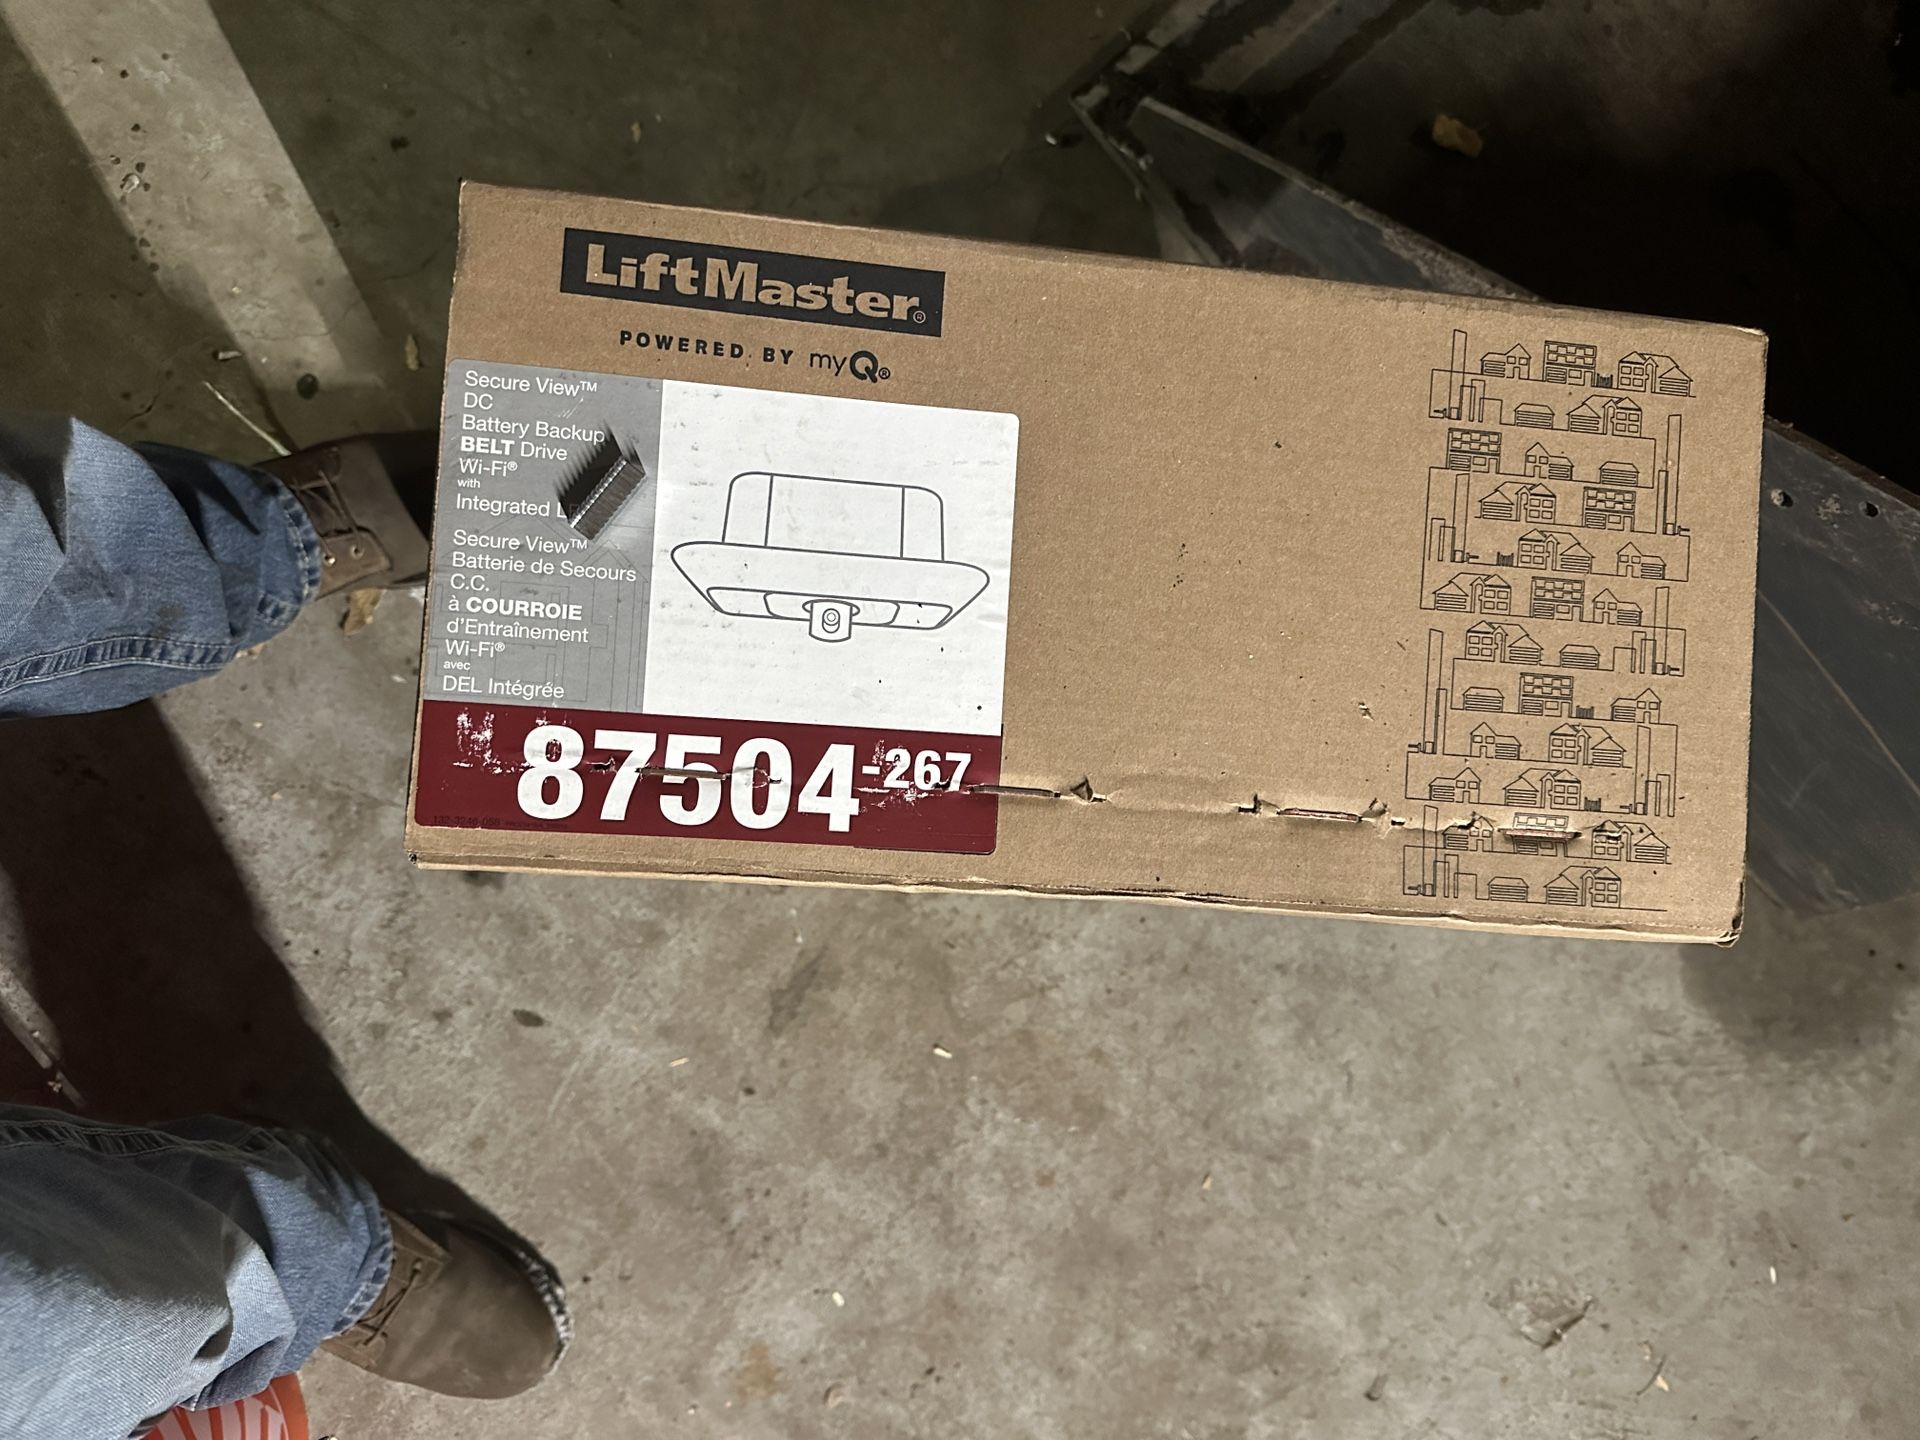 LiftMaster 87504-267 Powered By My Q